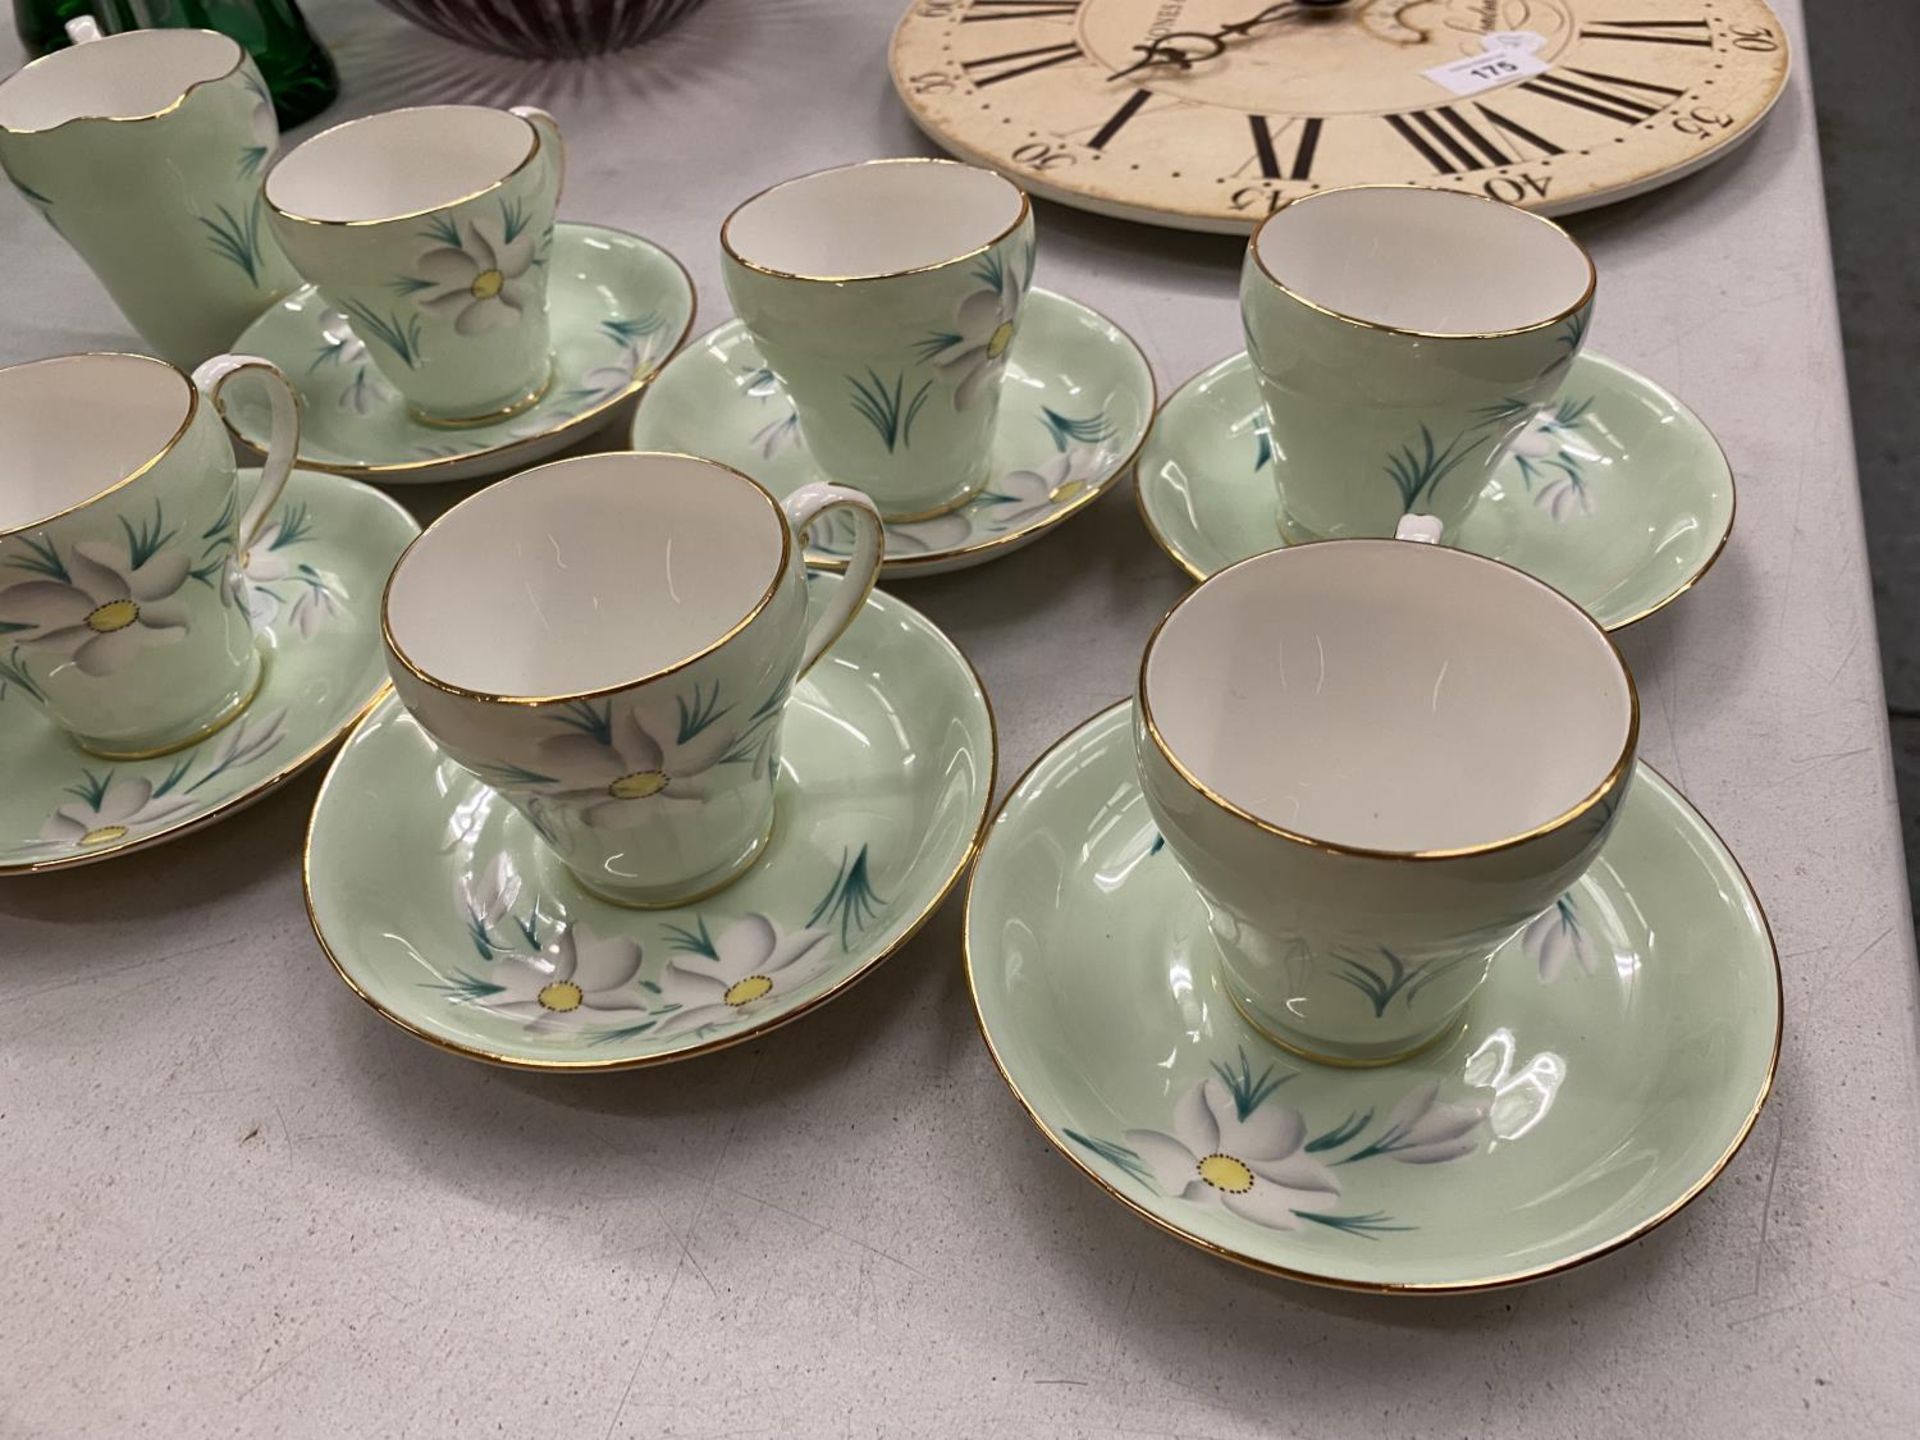 A ROYAL GRAFTON VINTAGE TEASET TO INCLUDE SIX CUPS AND SAUCERS, TEAPOT AND CREAM JUG - Image 2 of 4